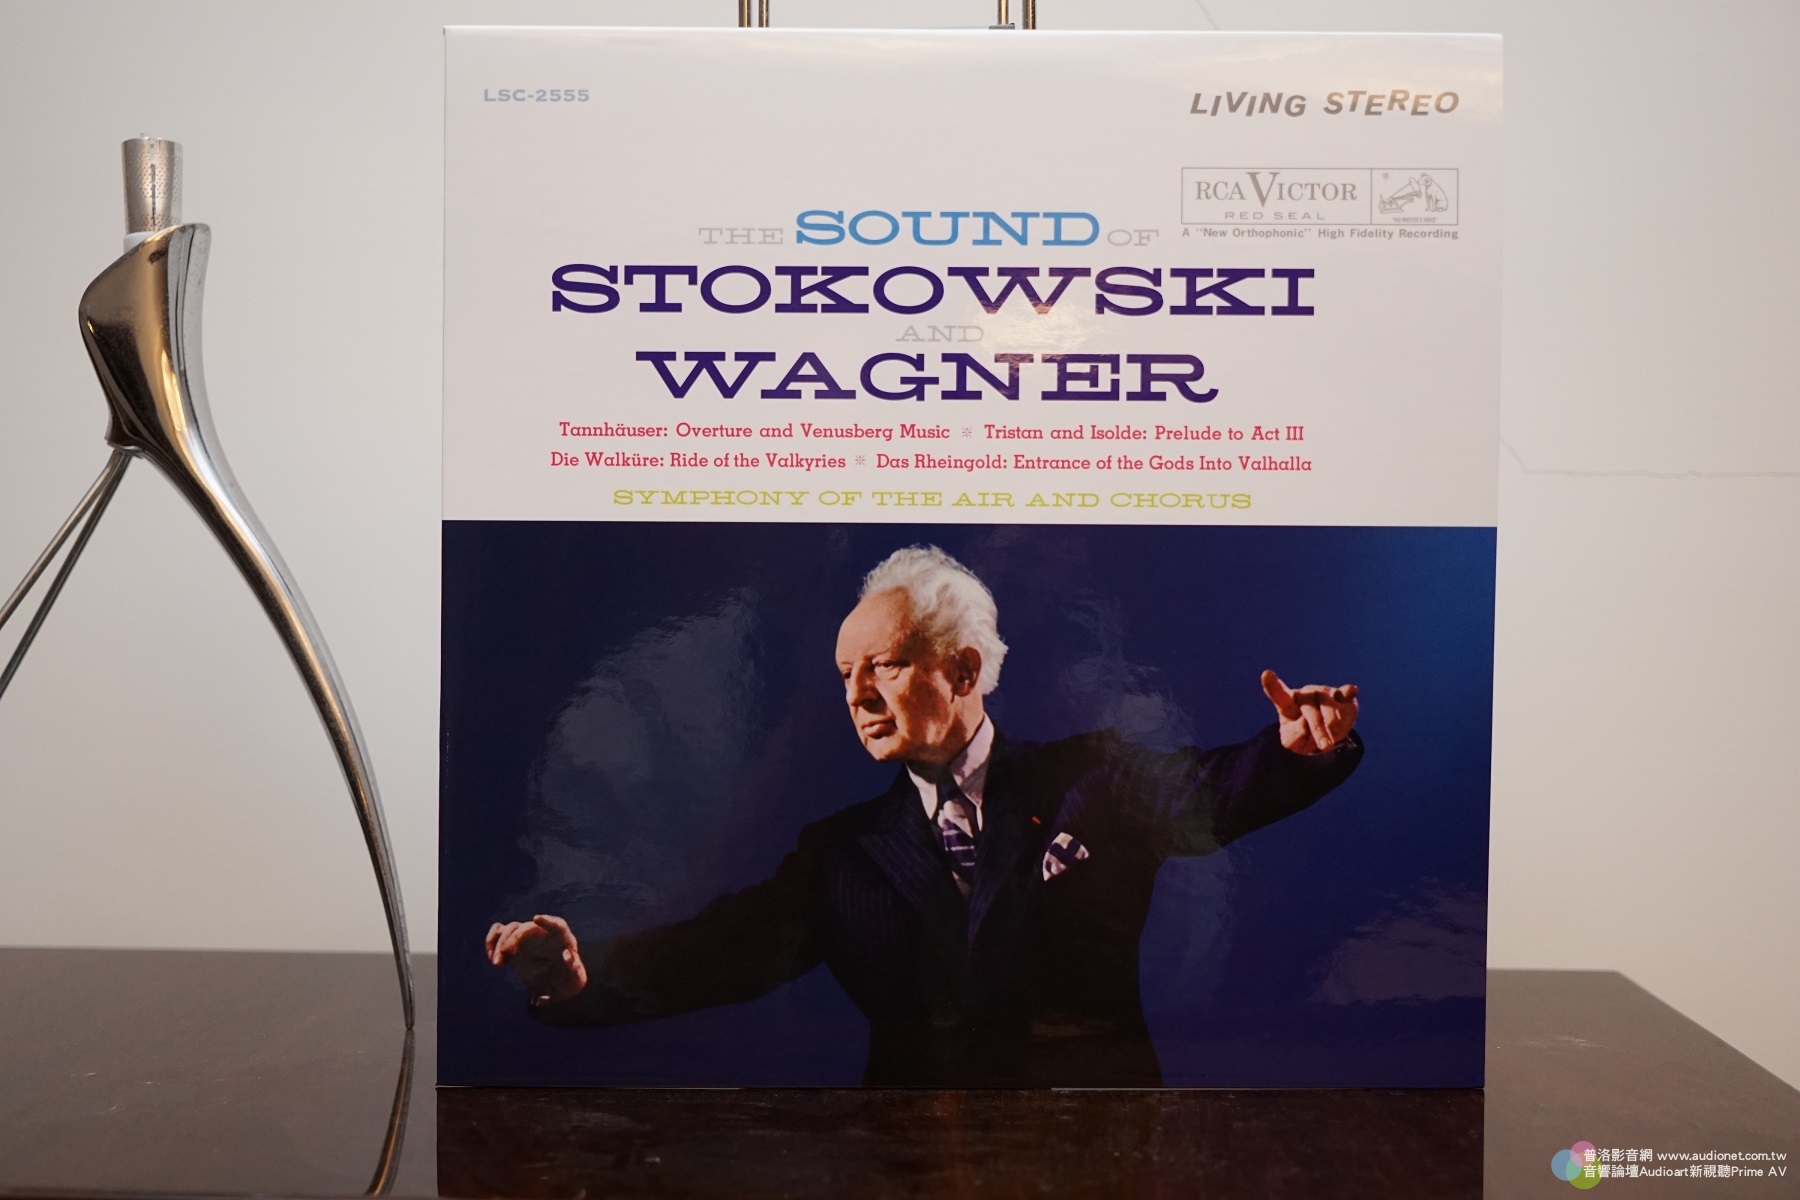 The Sound of Stokowski  and Wagner